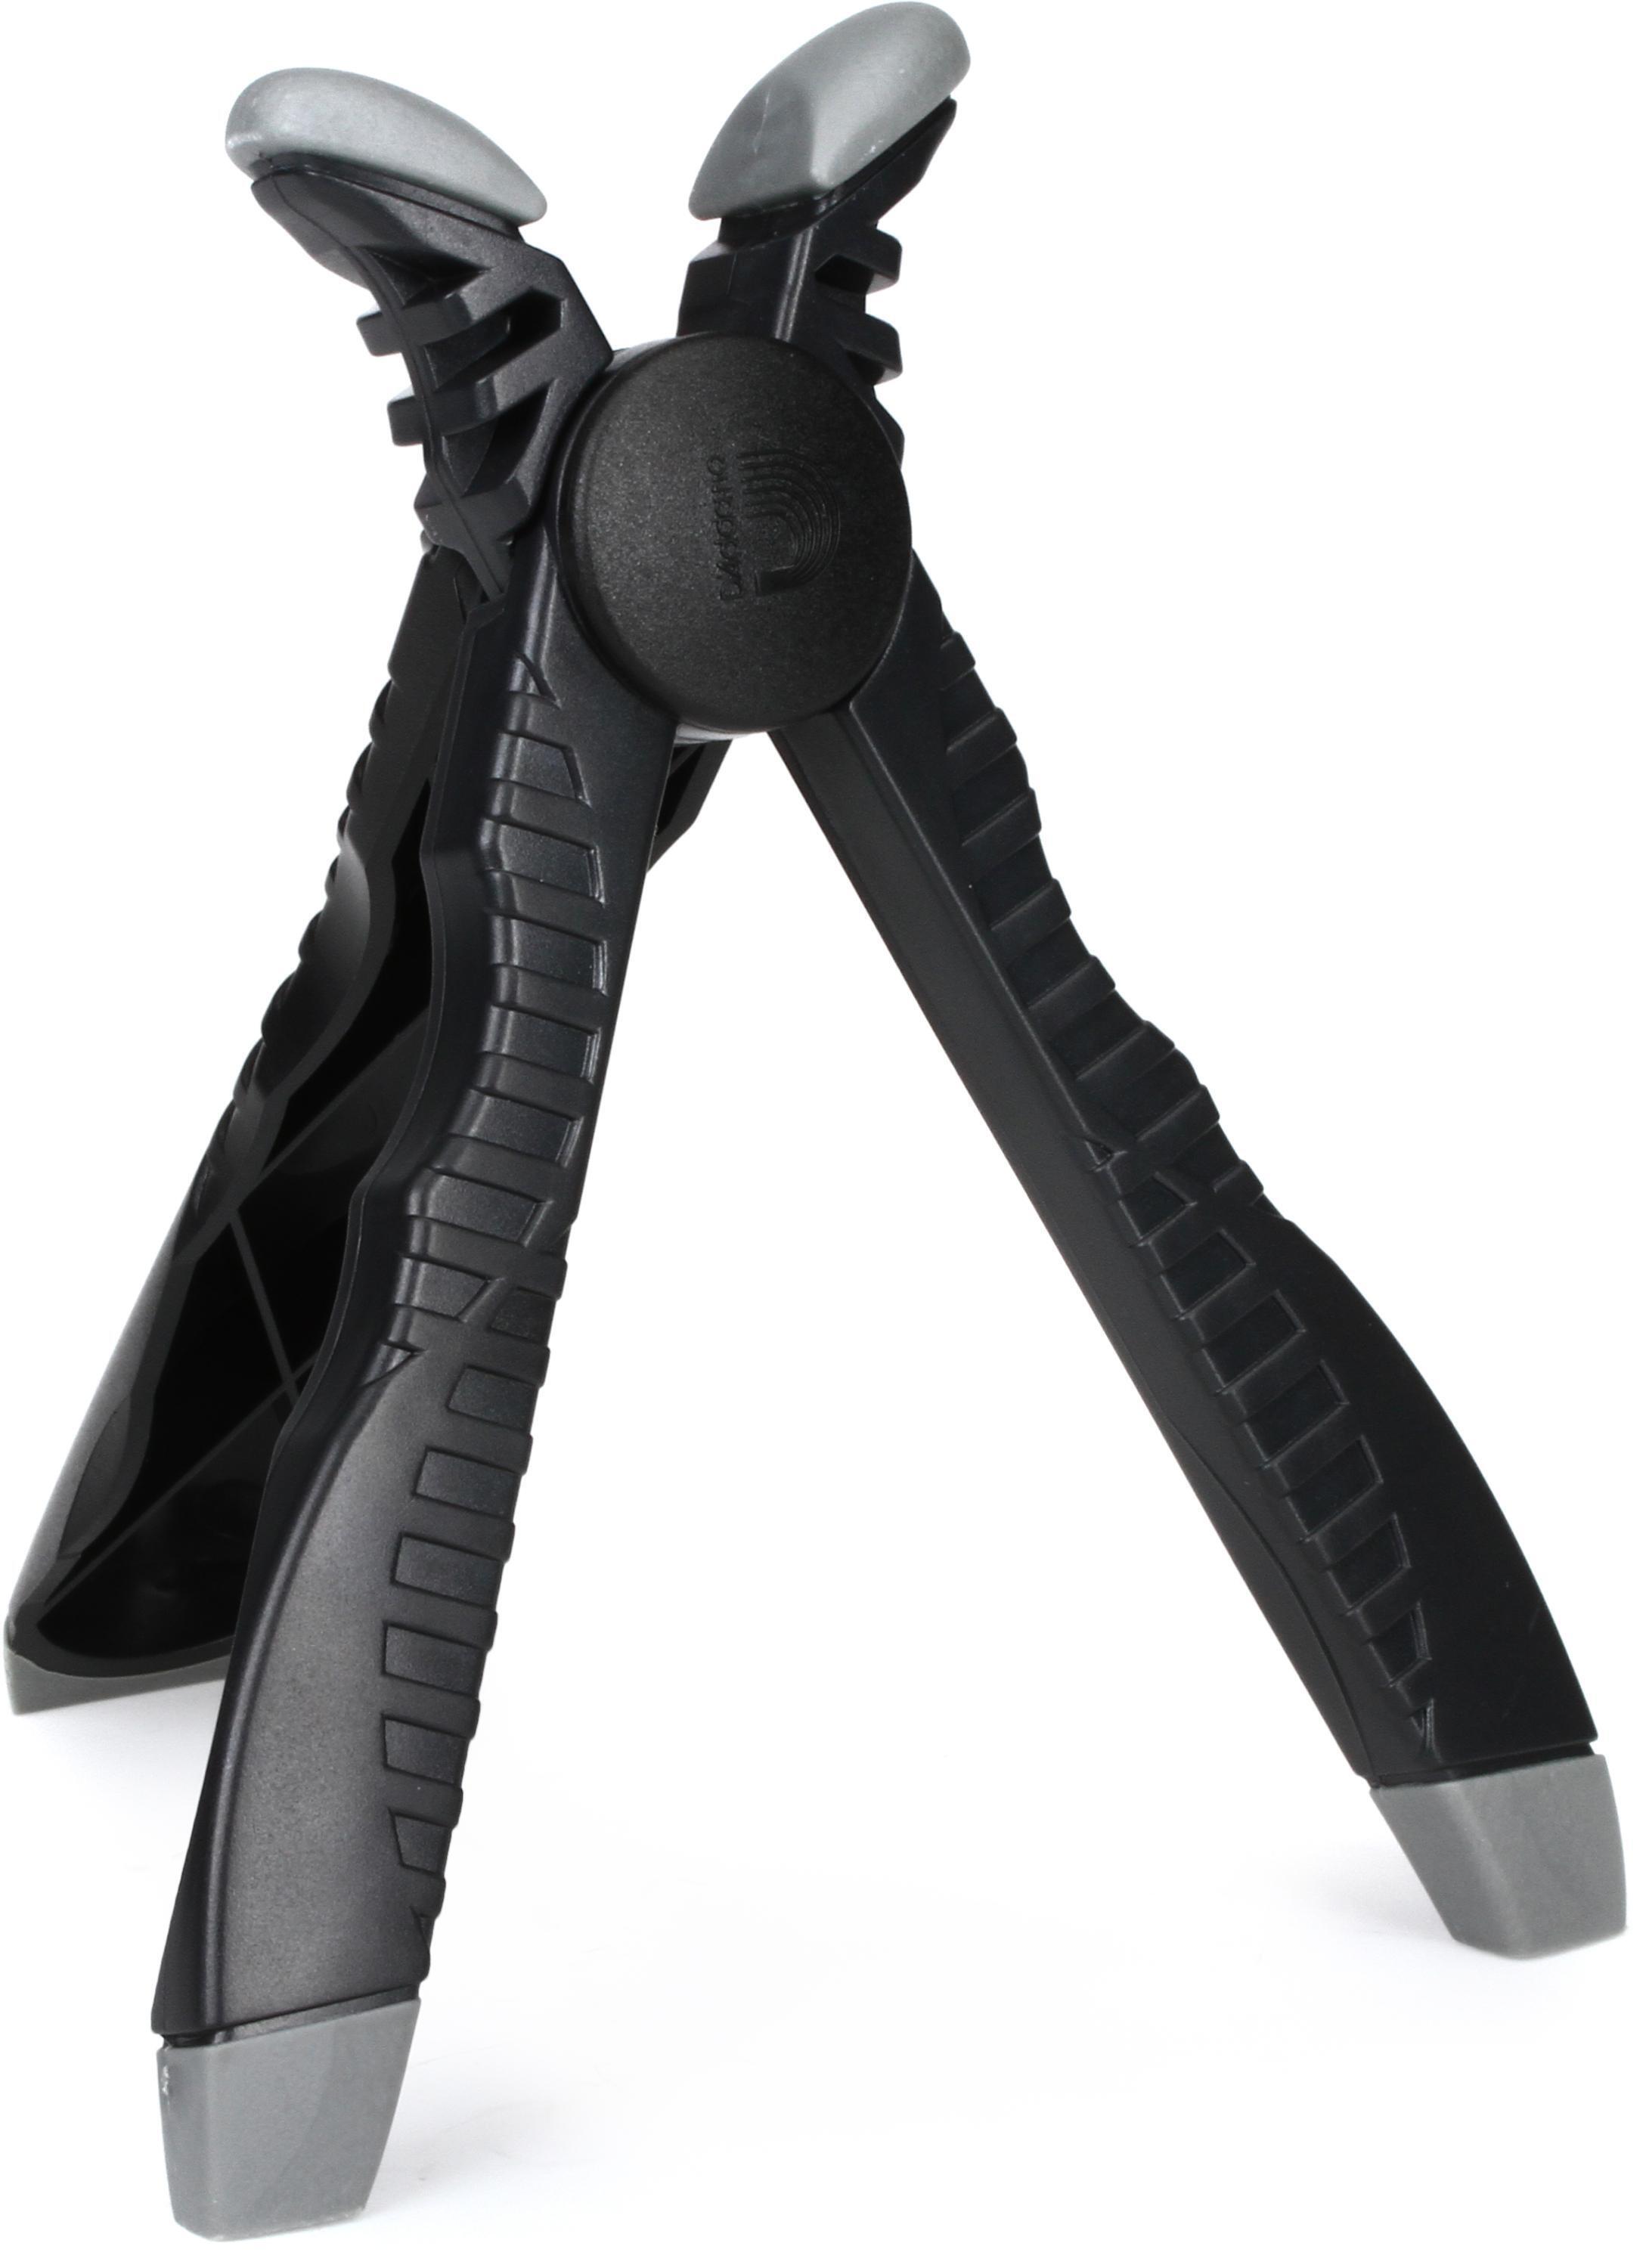 Bundled Item: D'Addario The Headstand Guitar Neck Support Stand